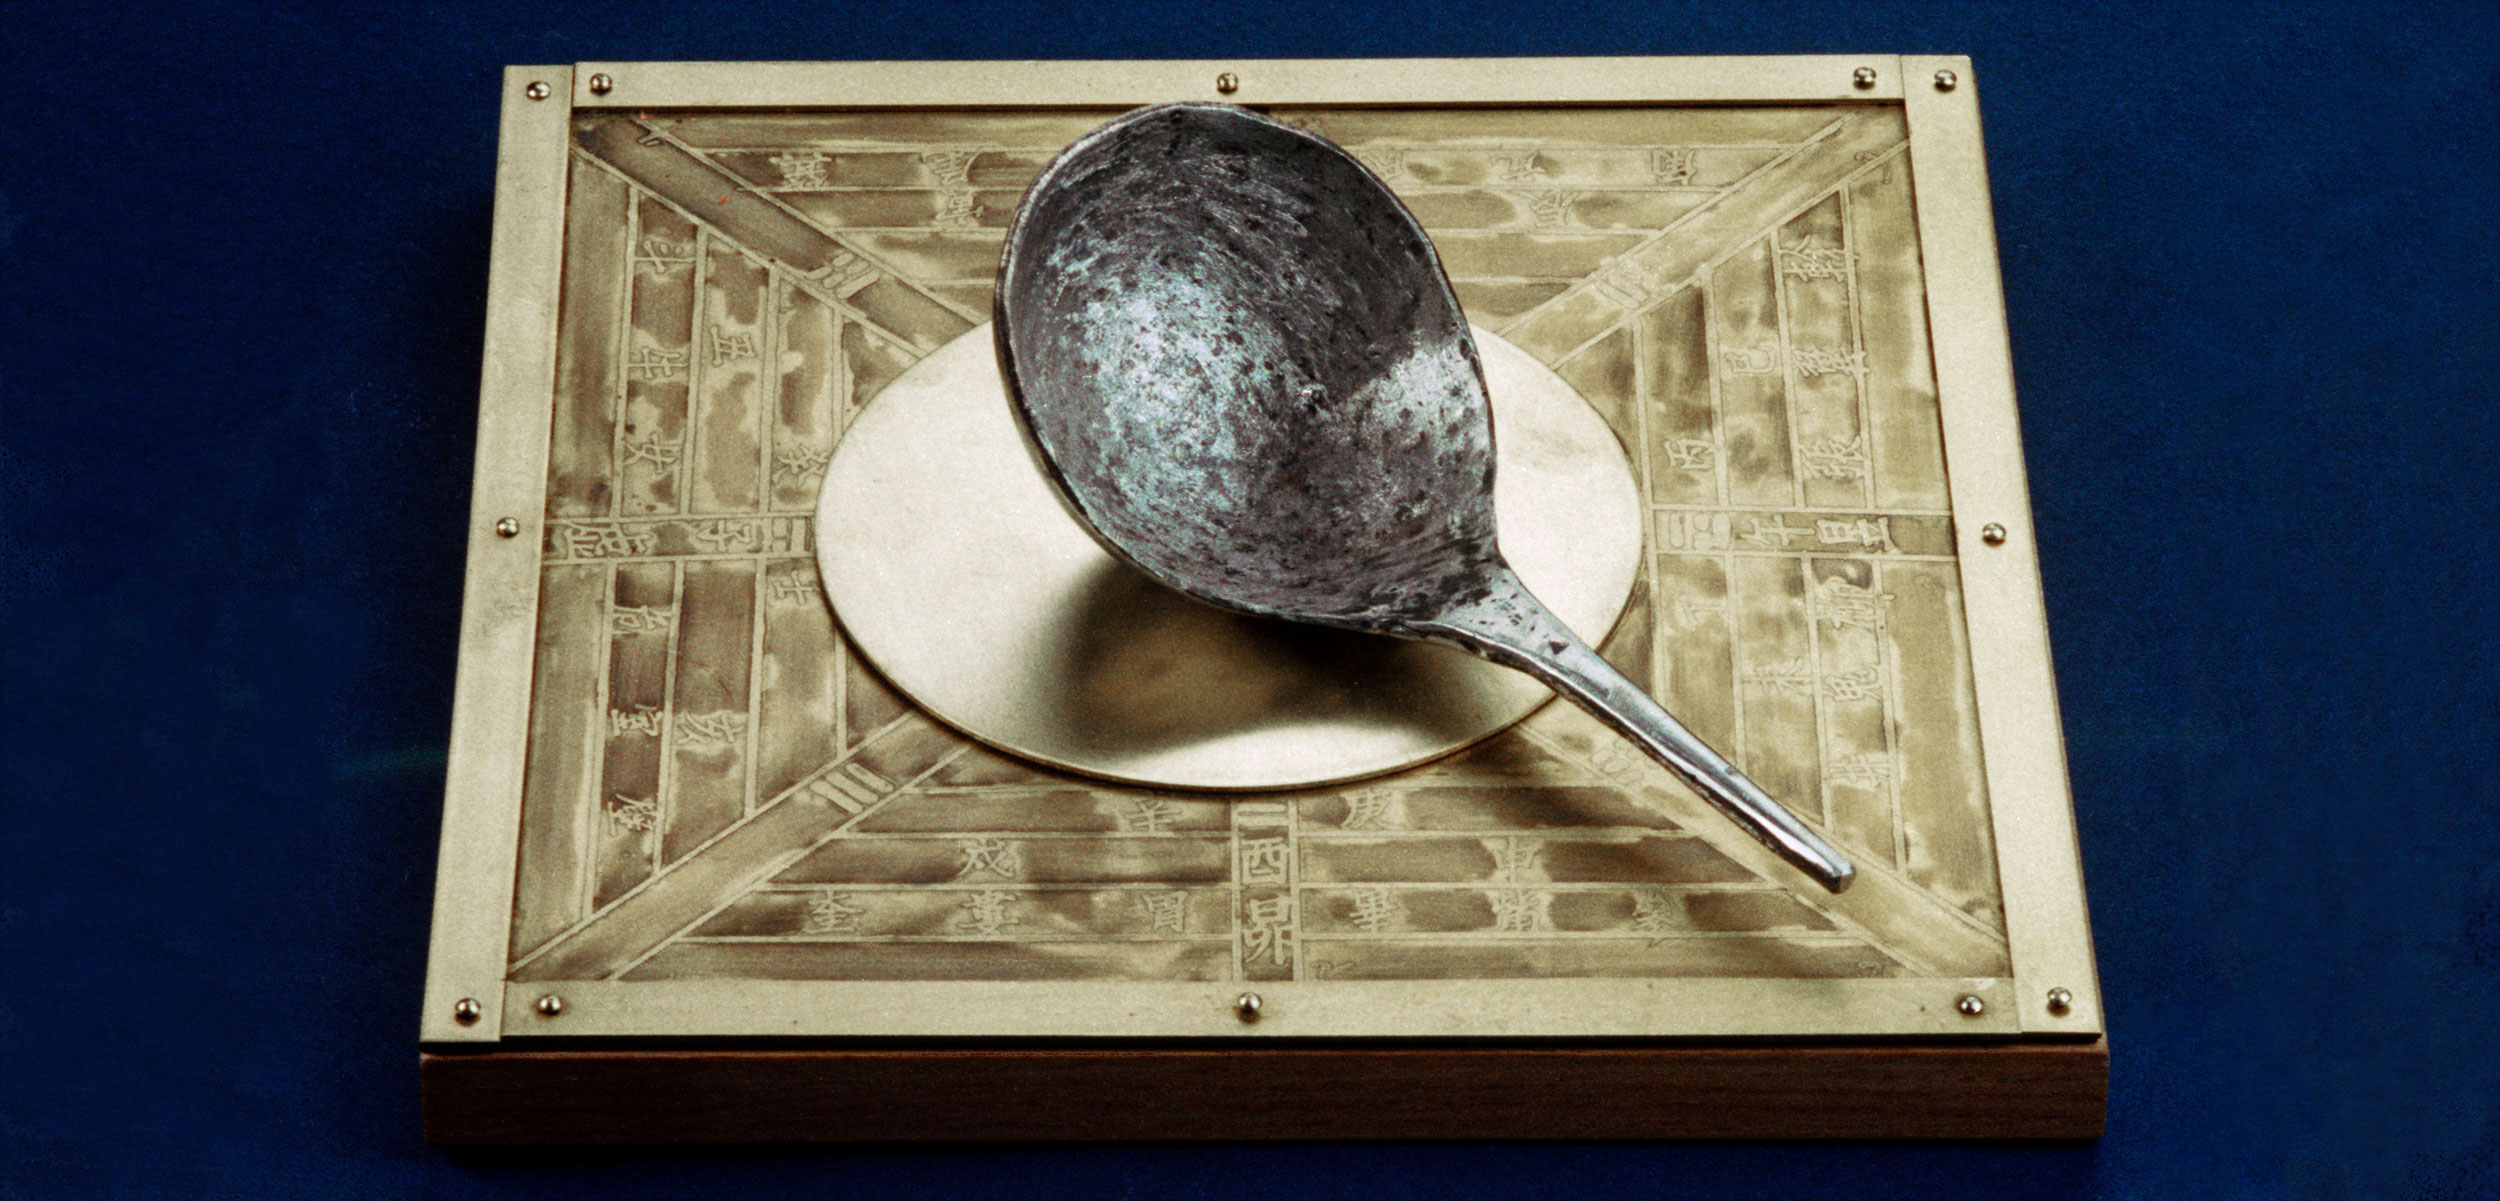 modern replica of a south pointing spoon, an early compass